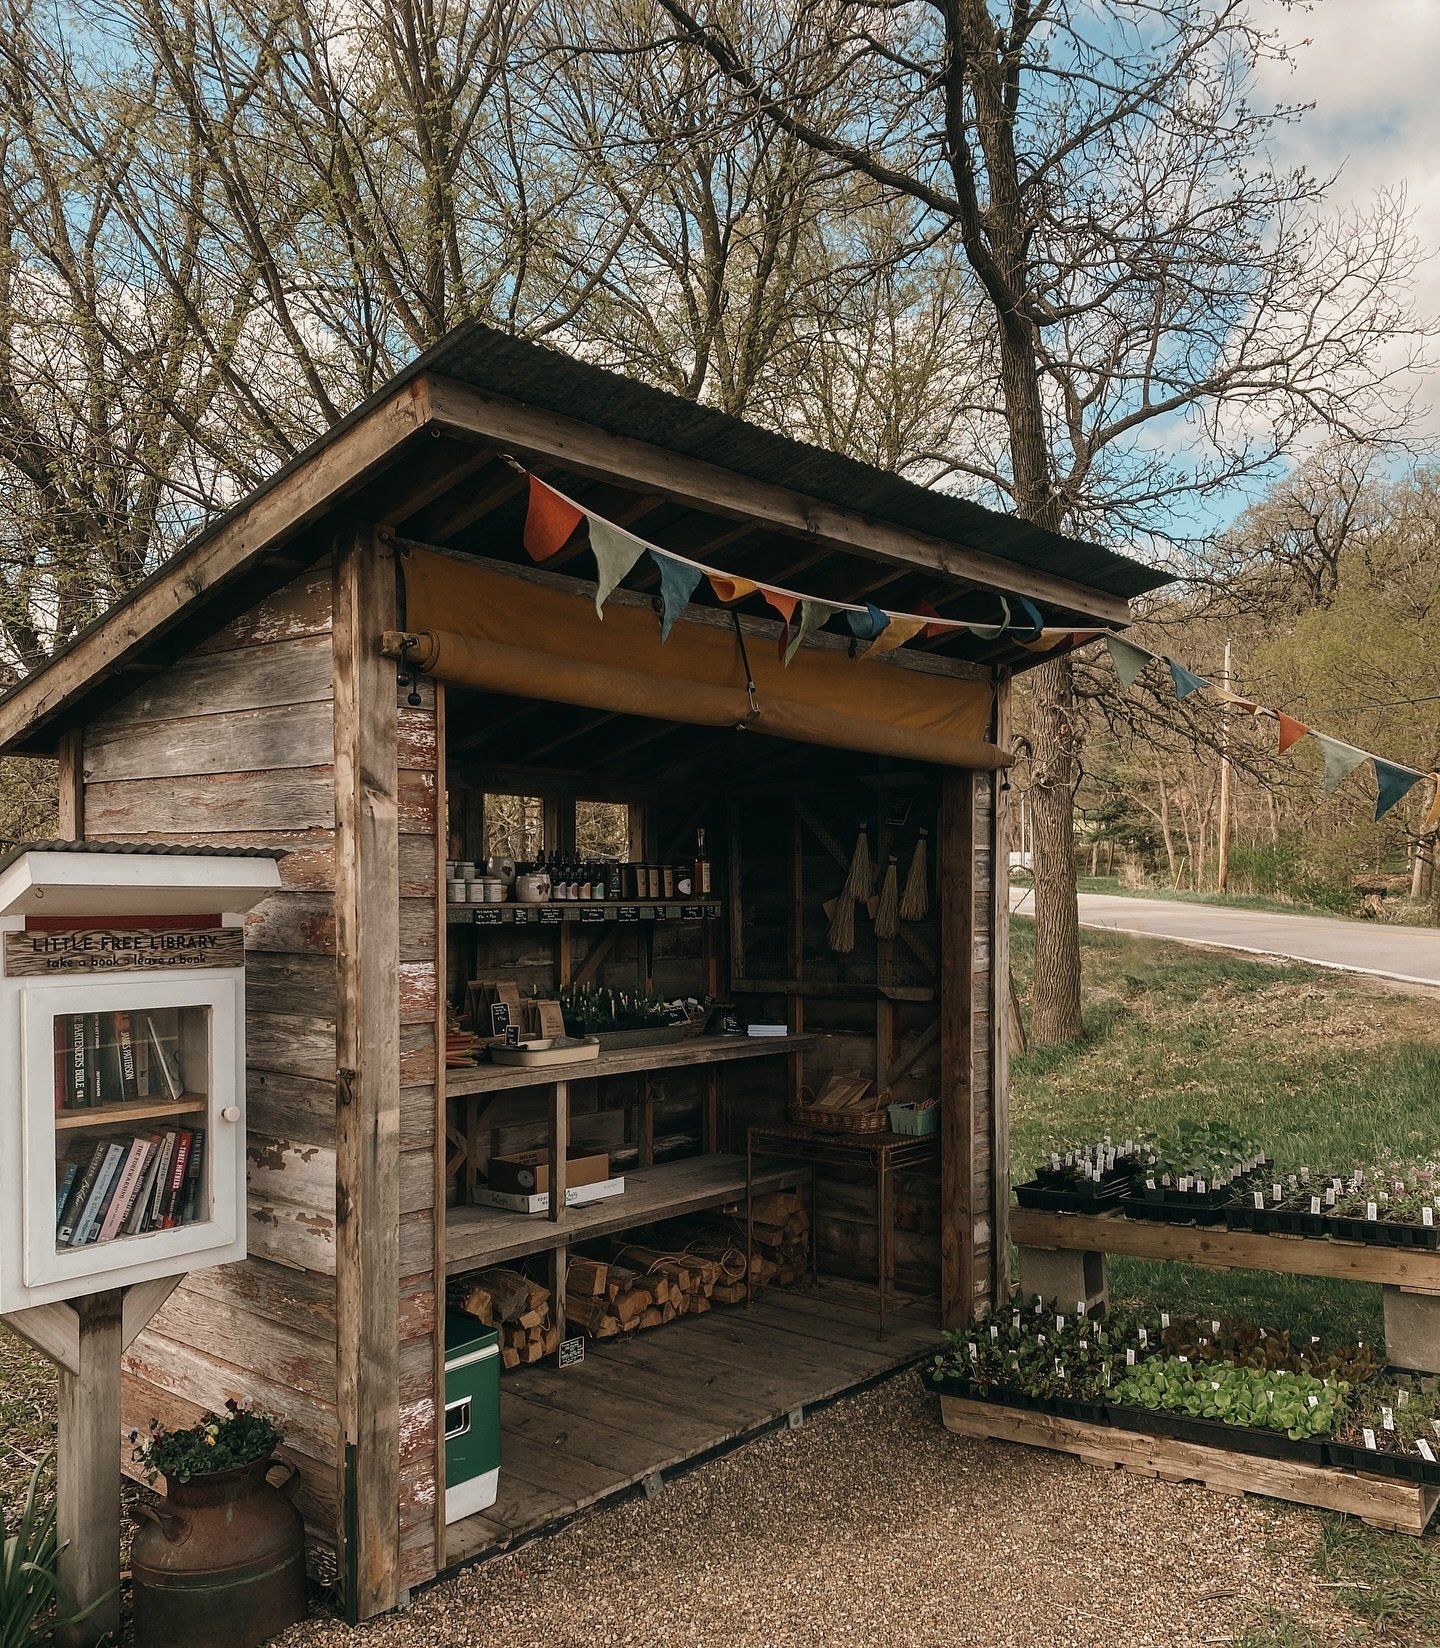 ✨ Spring on the farm stand ✨

One of my favorite views! The farm stand is stocked with fresh rhubarb, cold hardy (though we&rsquo;re bringing them in at night for these cold overnight temps) seedlings, firewood, farm goods and more. The air is crisp 